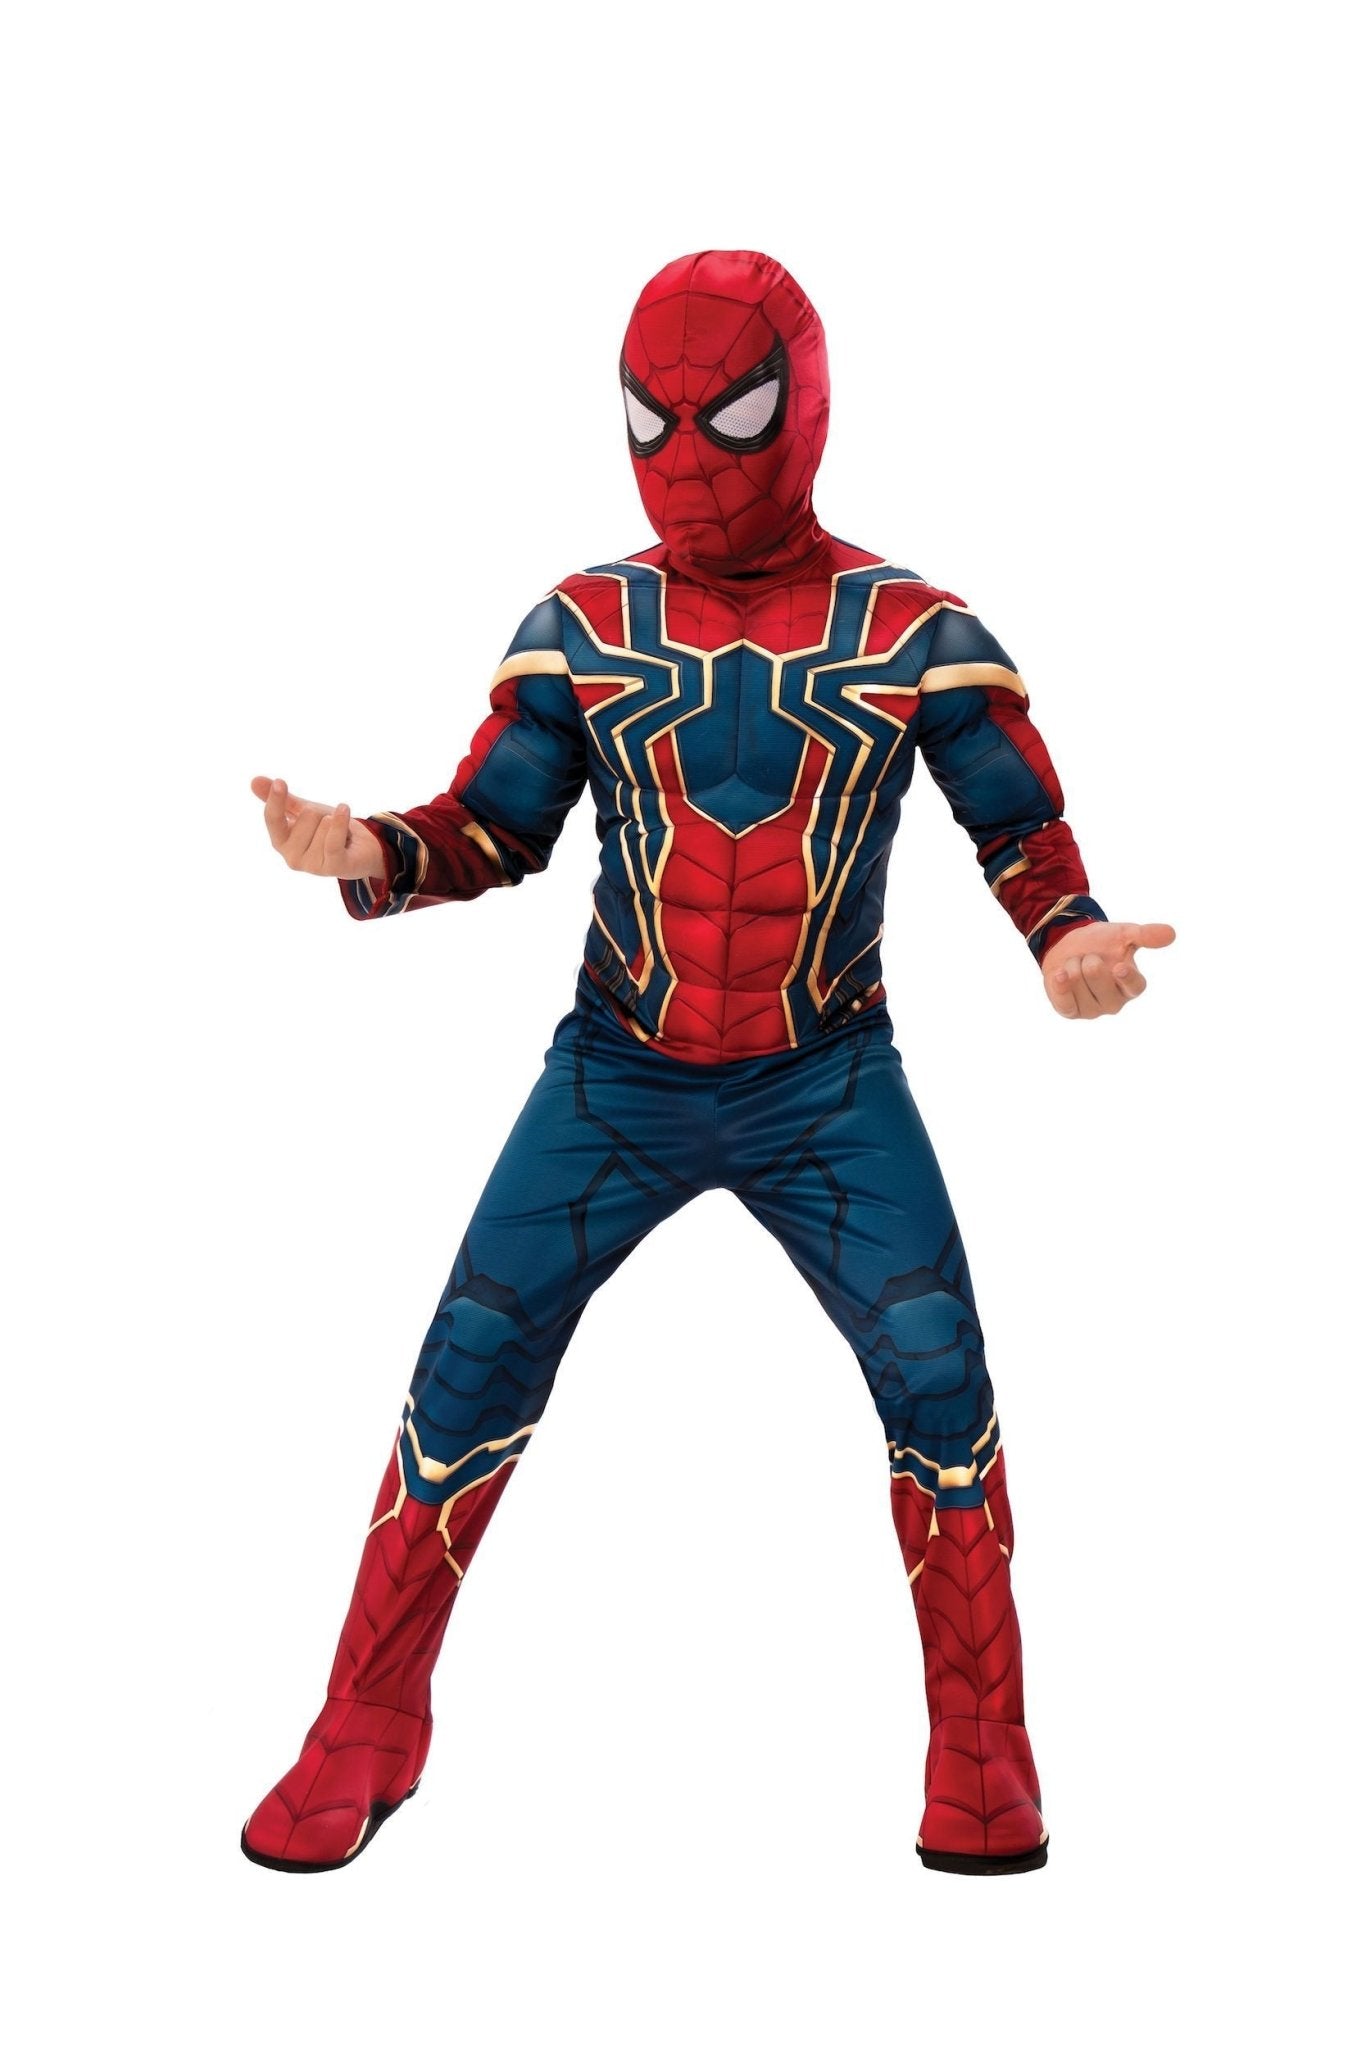 Boys Deluxe Iron Spider Costume - Avengers: Infinity War - JJ's Party House